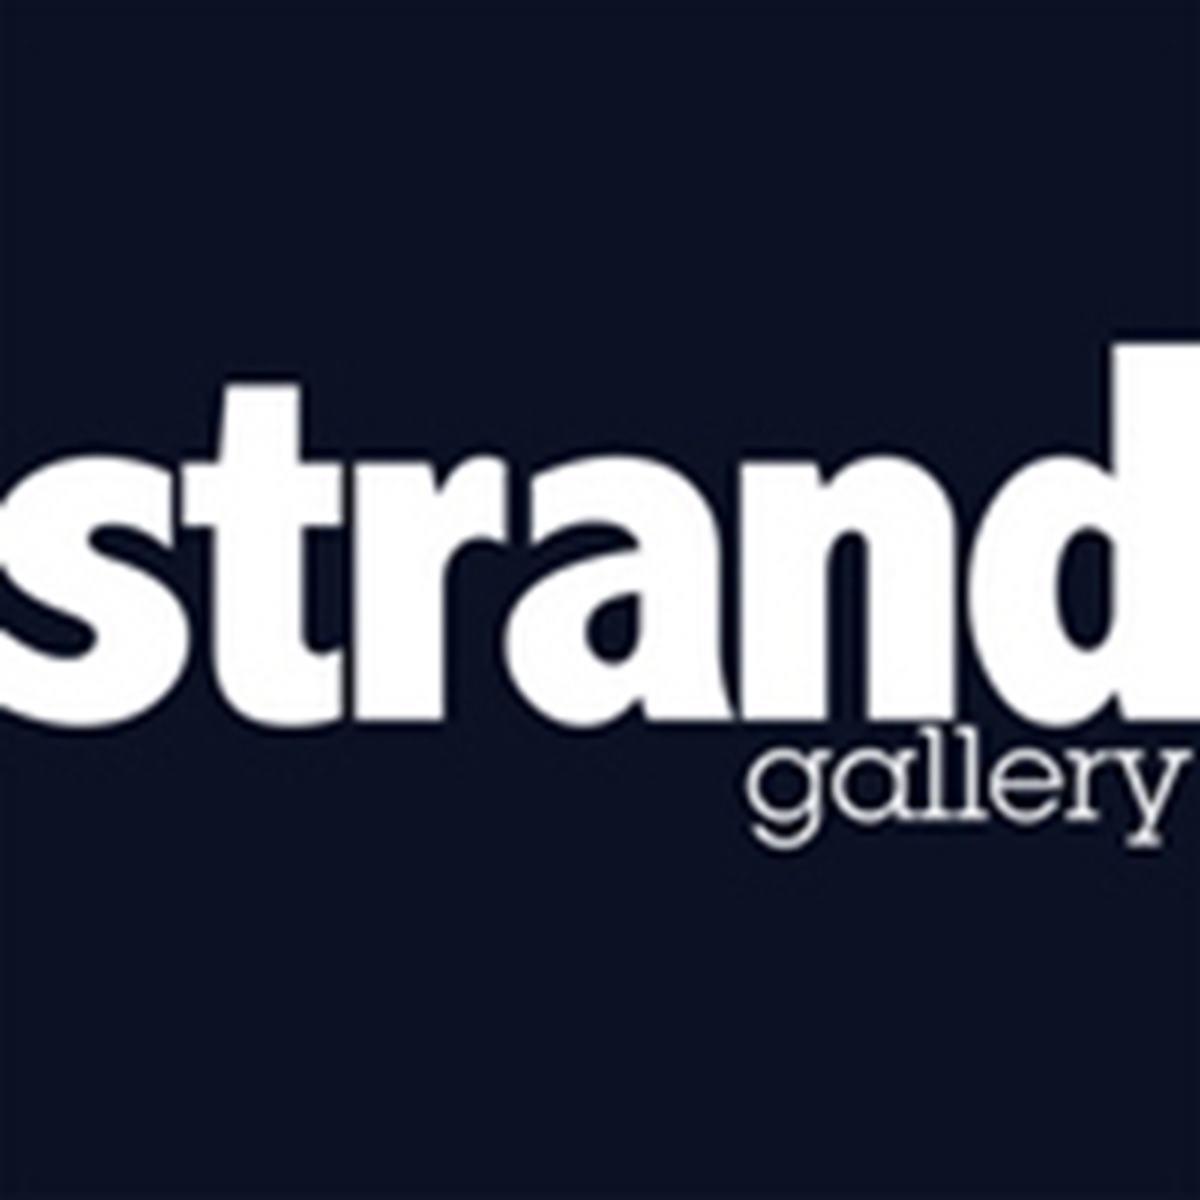 Whole Gallery, The Strand Gallery photo #2